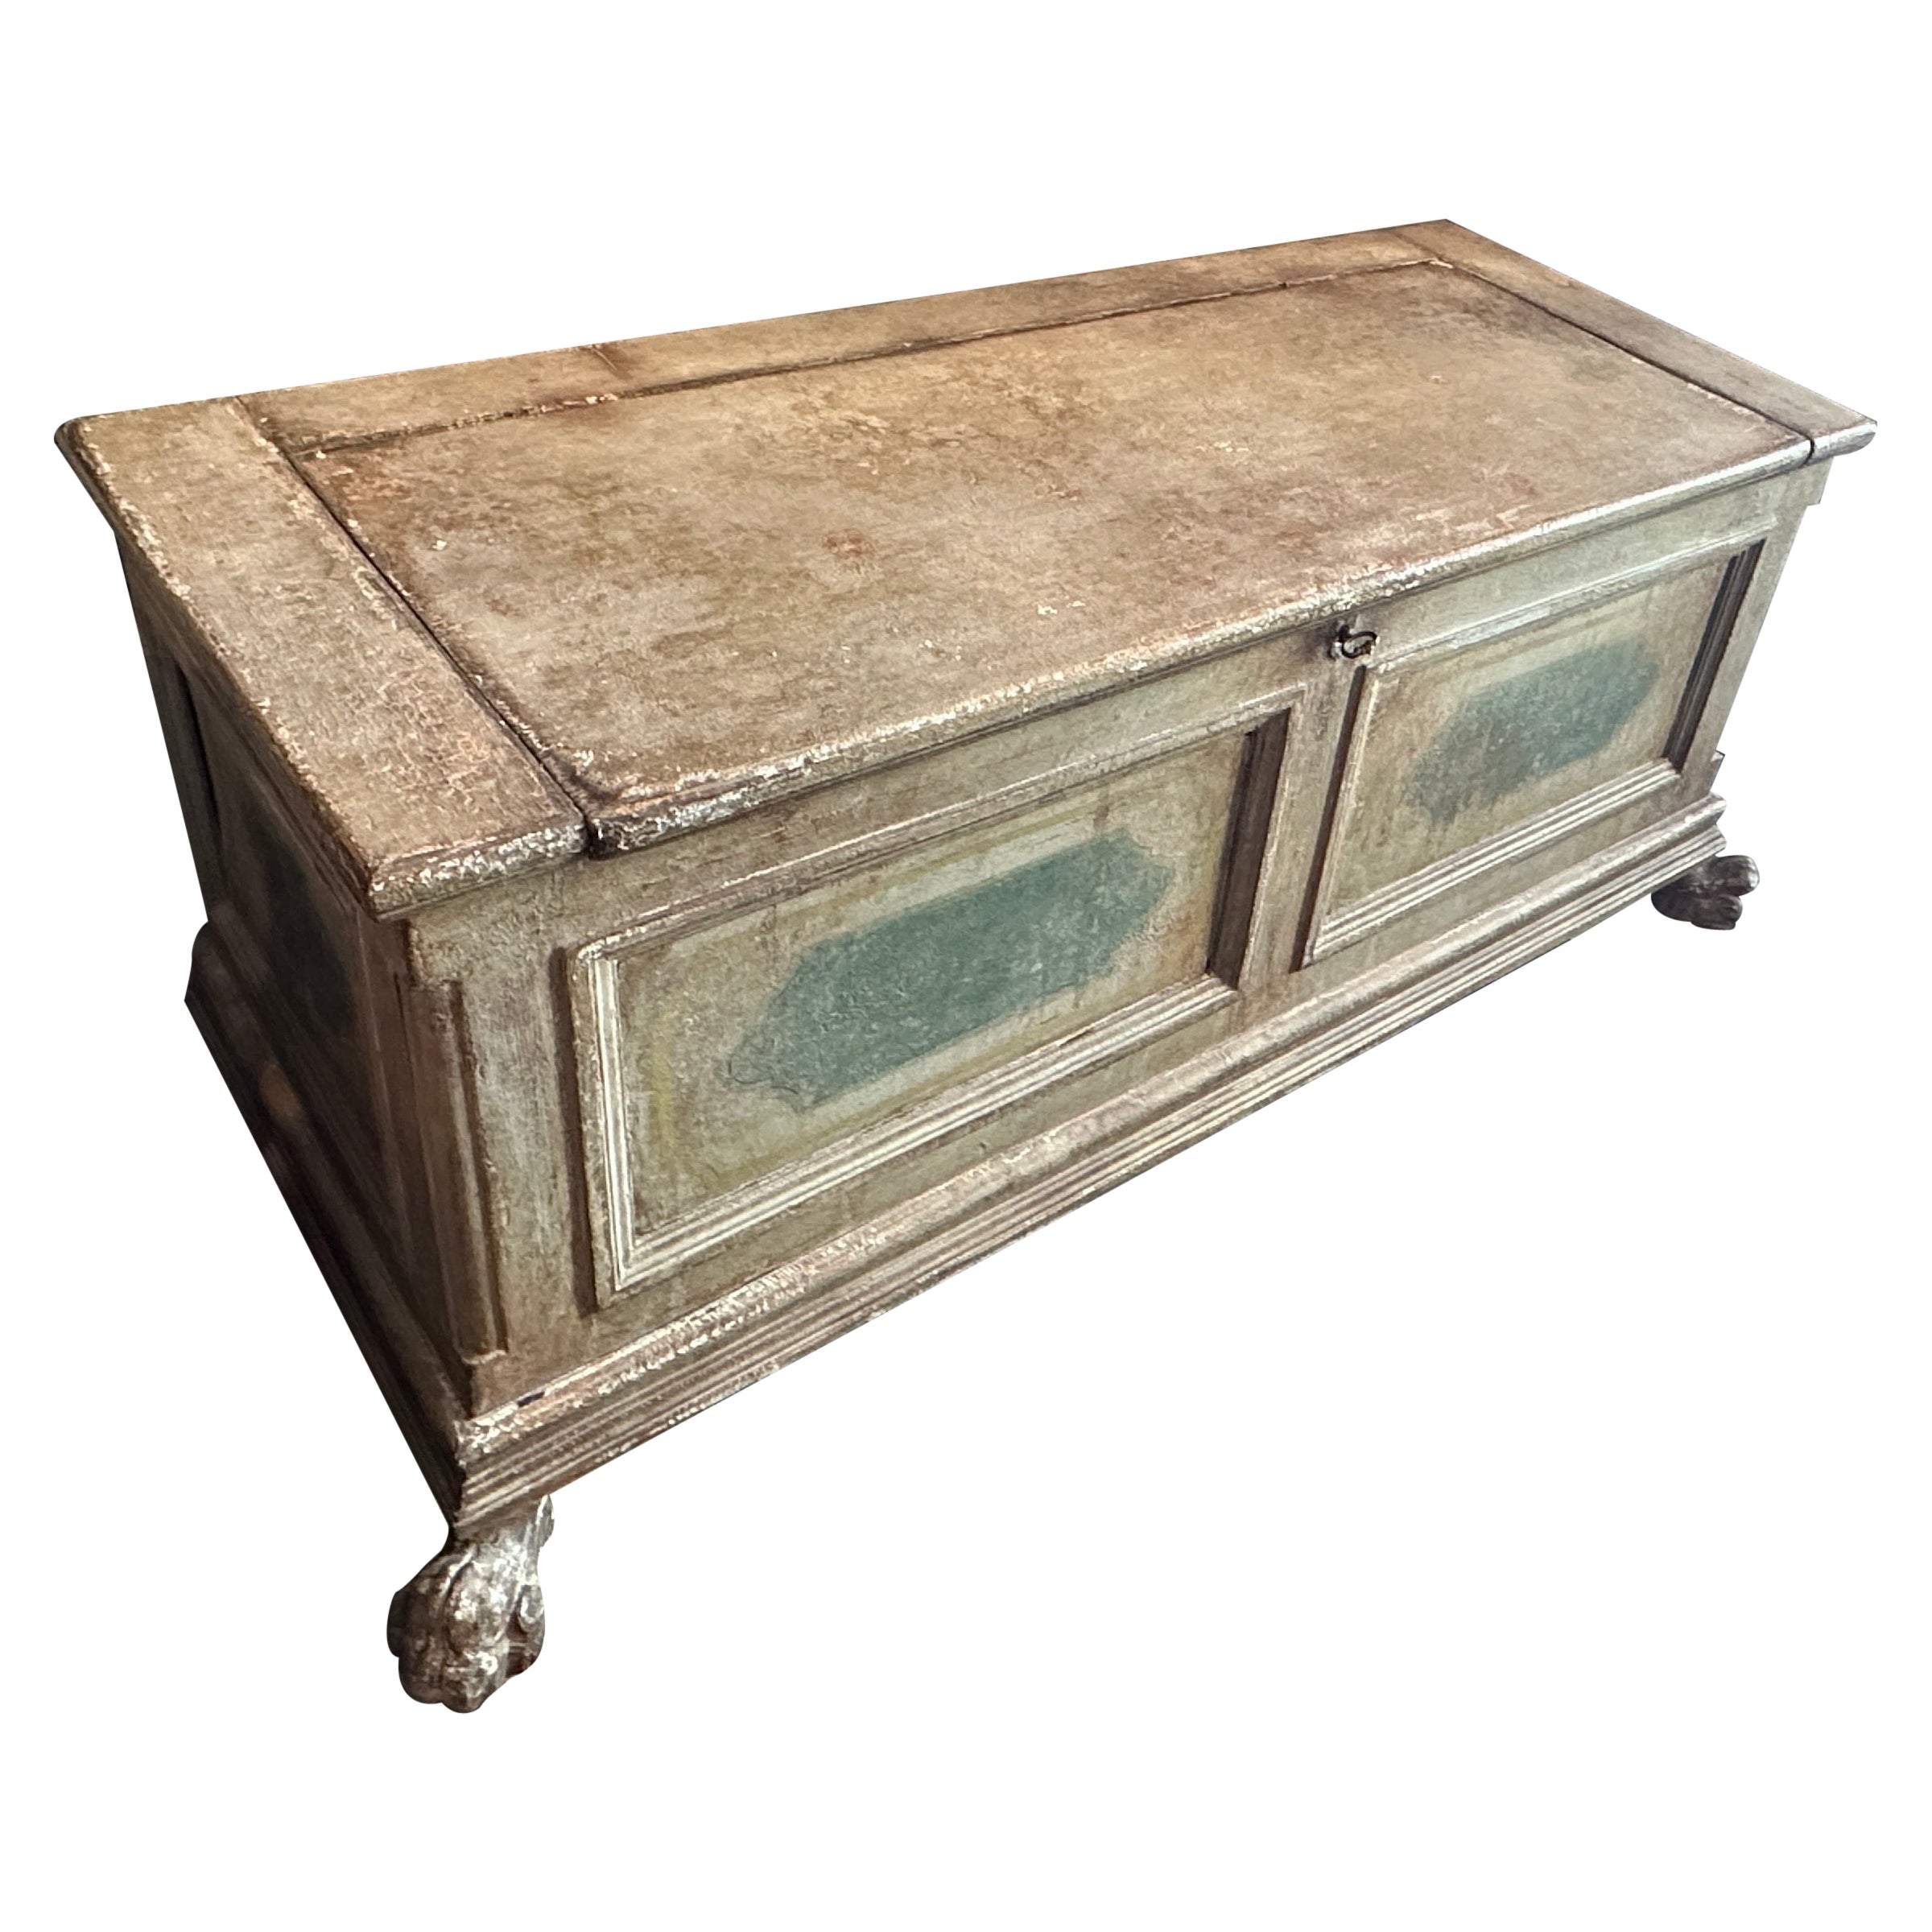 Late 19th Century Green and White Lacquered Wood Florentine Blanket Chest